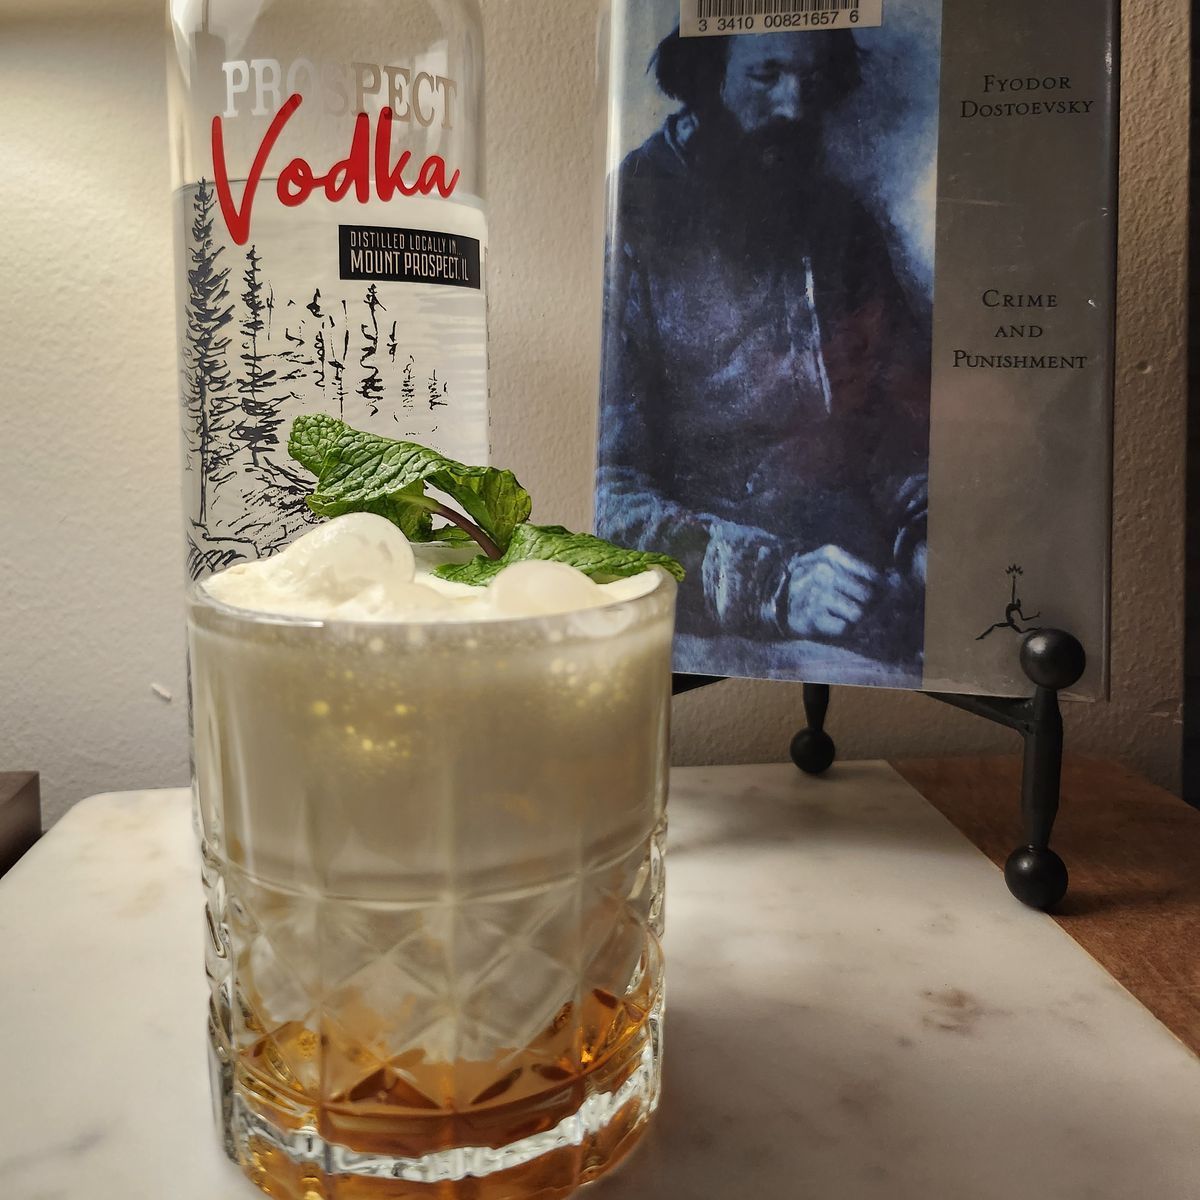 A minty take on a classic White Russian, featuring Prospect Vodka from Two Eagles Distillery! Thank you for the chance to try this vodka! Cheers!